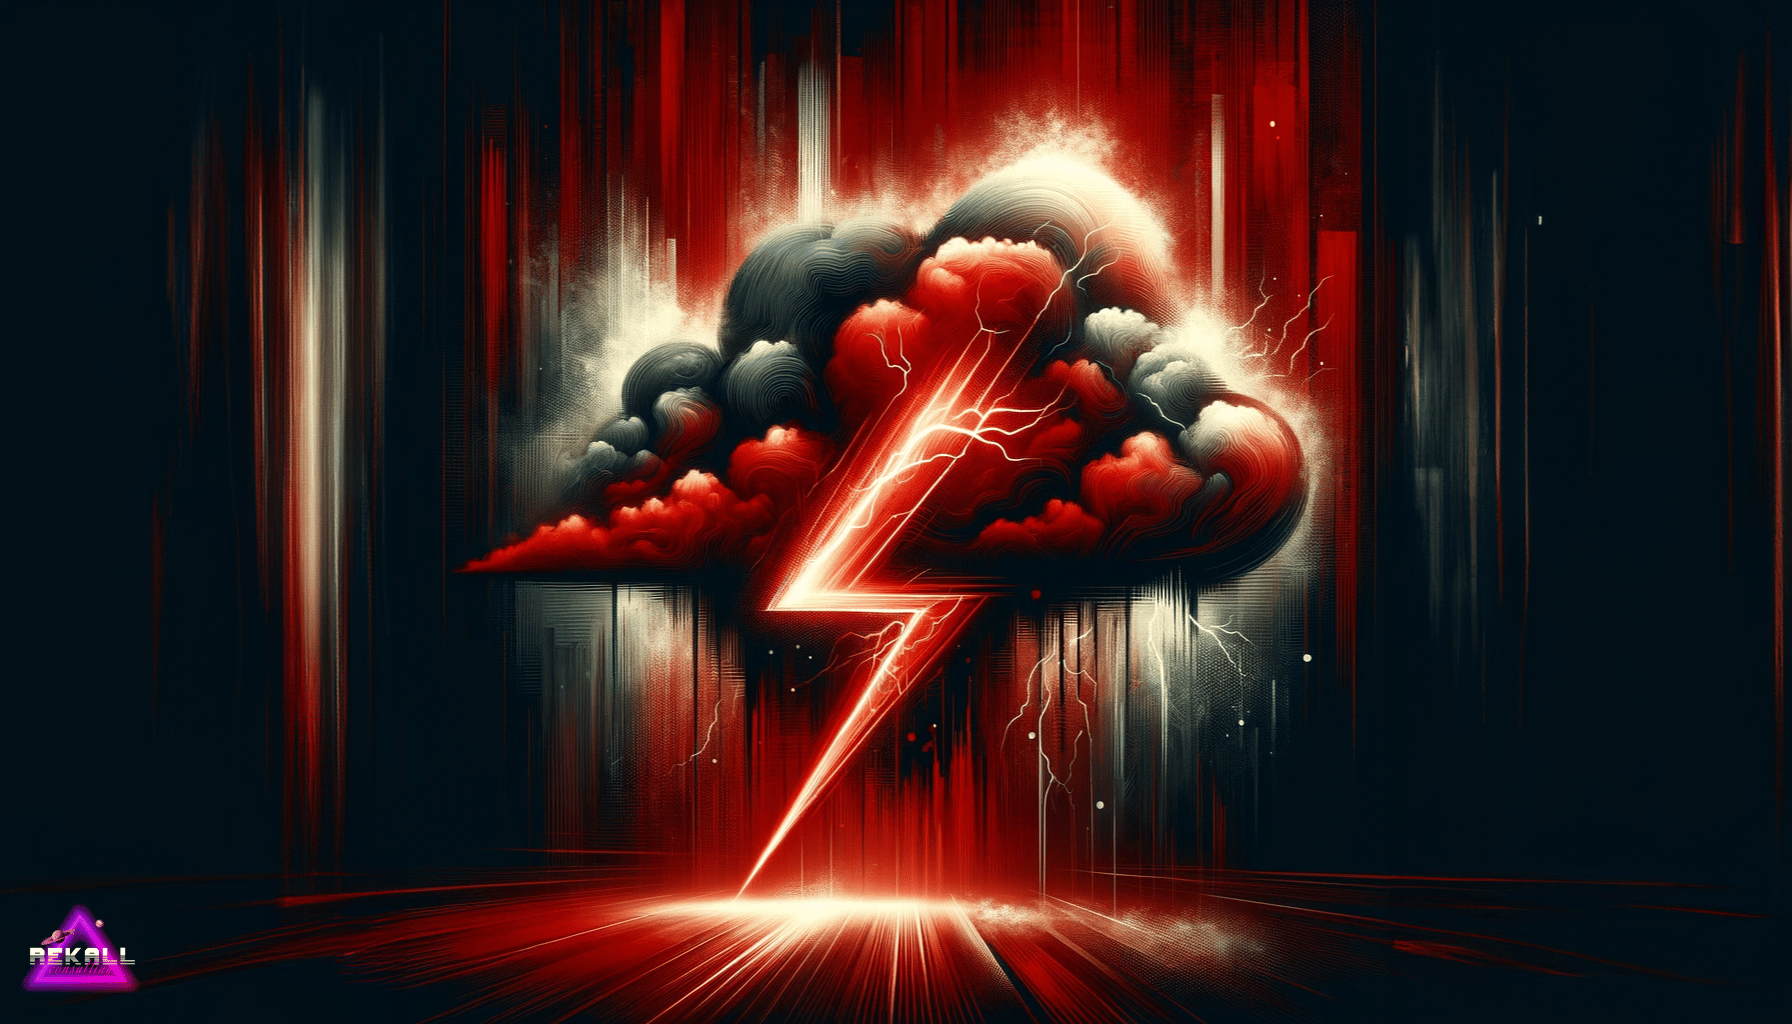 Image of cloud with red lightning bolt striking through the middle